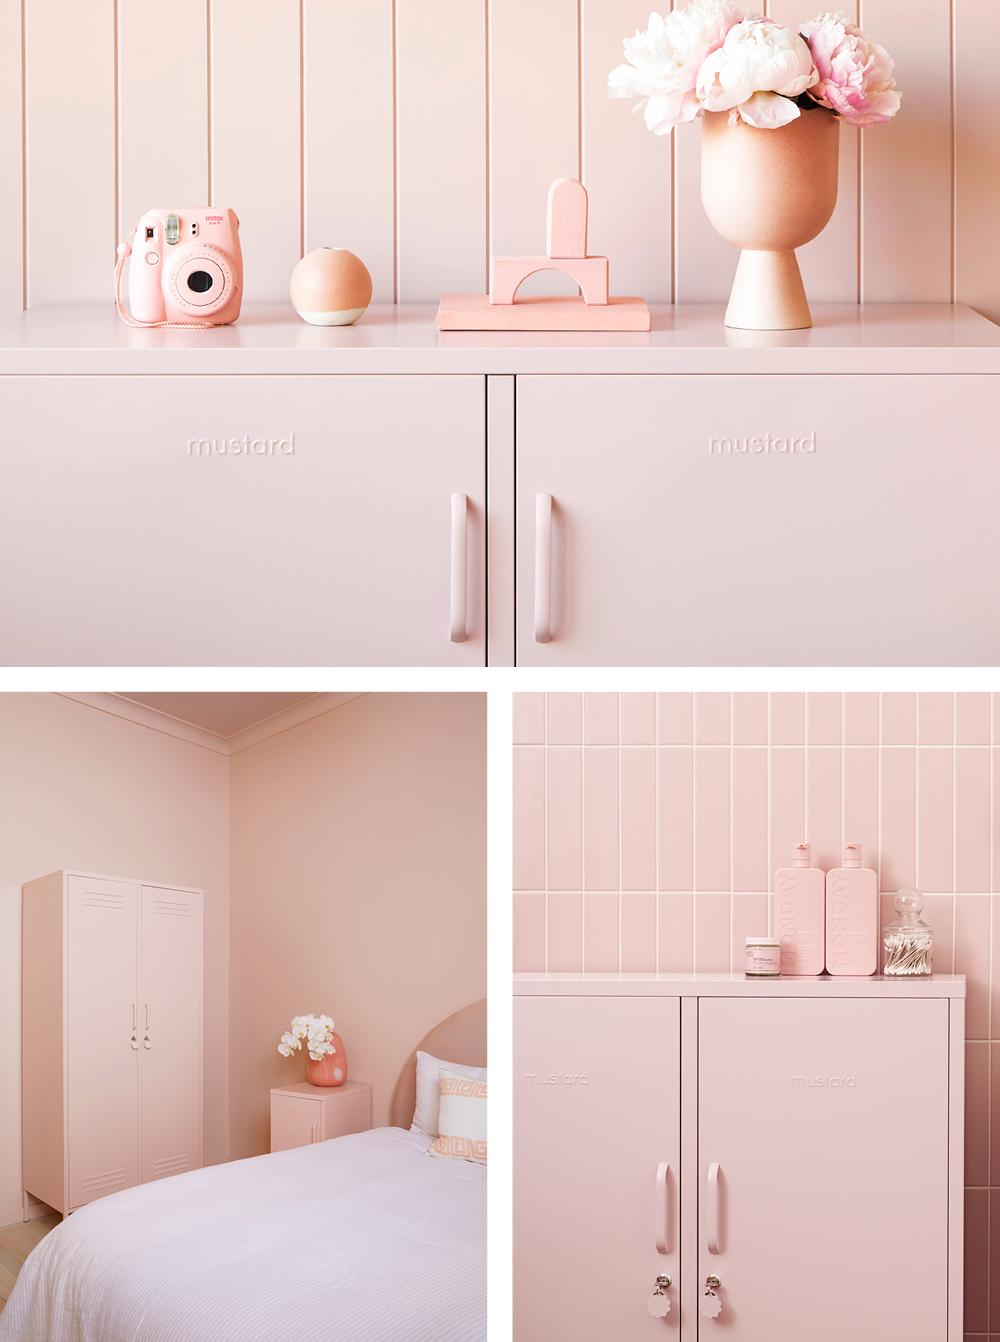 A collage of Blush pink lockers styled with linens, accessories and walls in the same color.